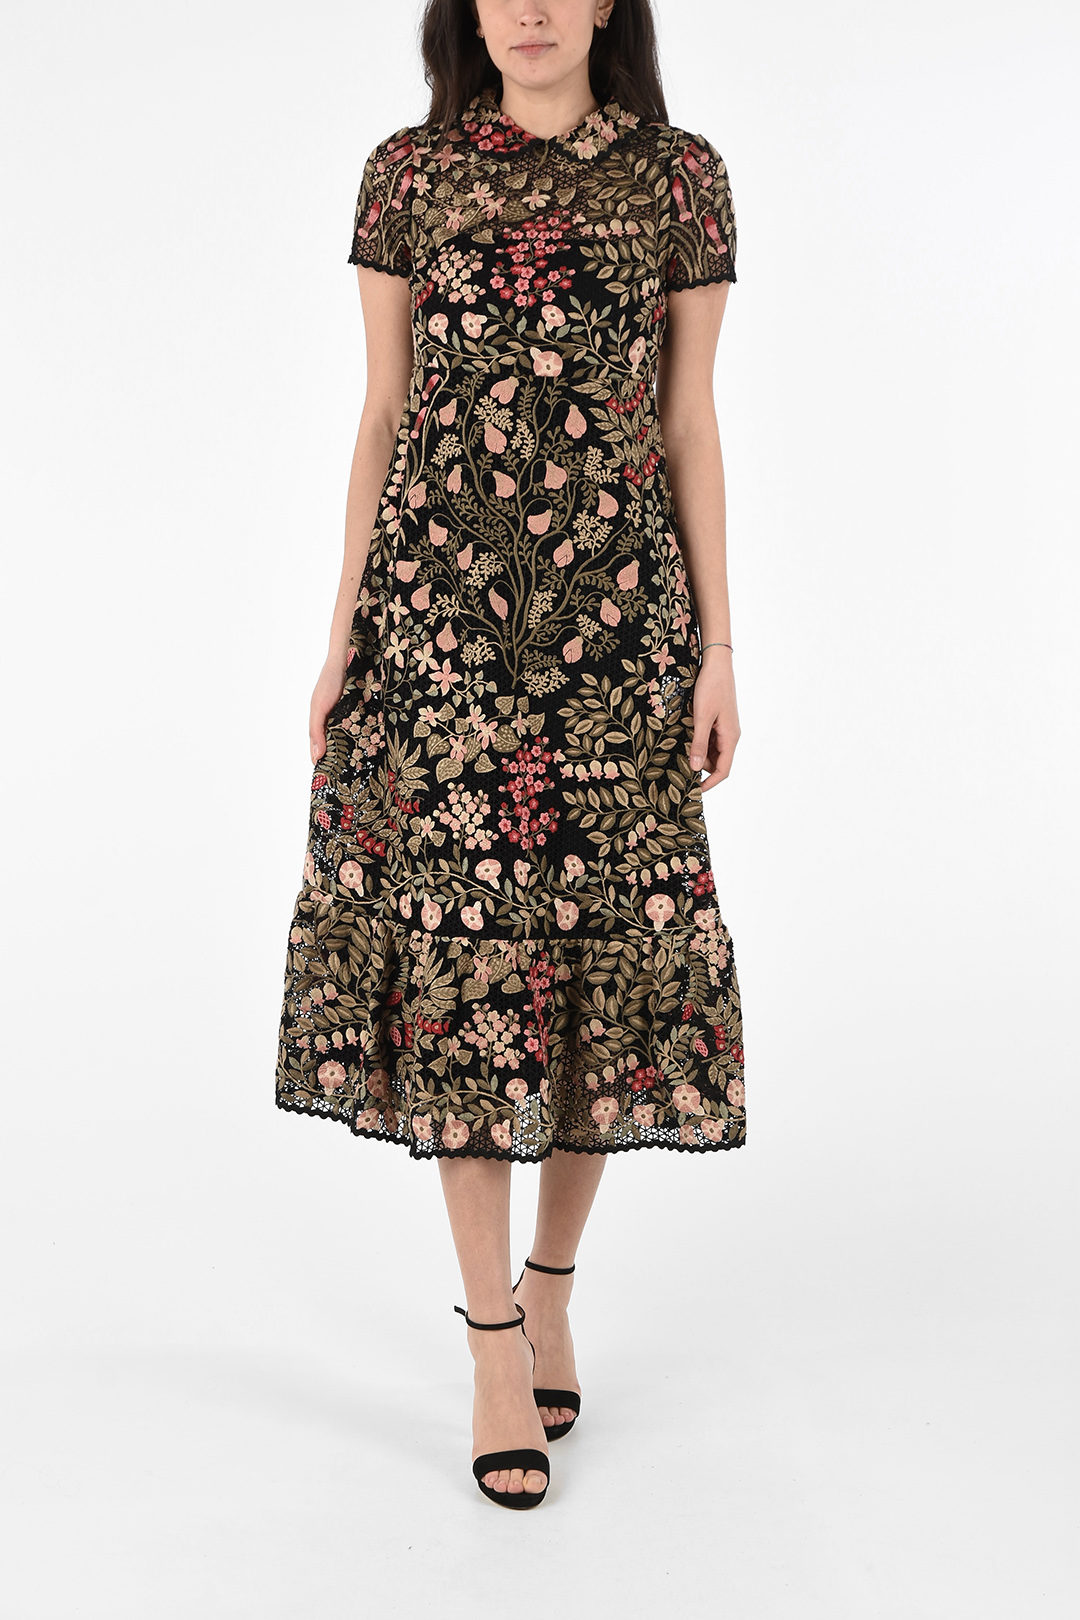 Red Valentino Floral Embroidered Short Sleeve Dress with Petticoat - Outlet